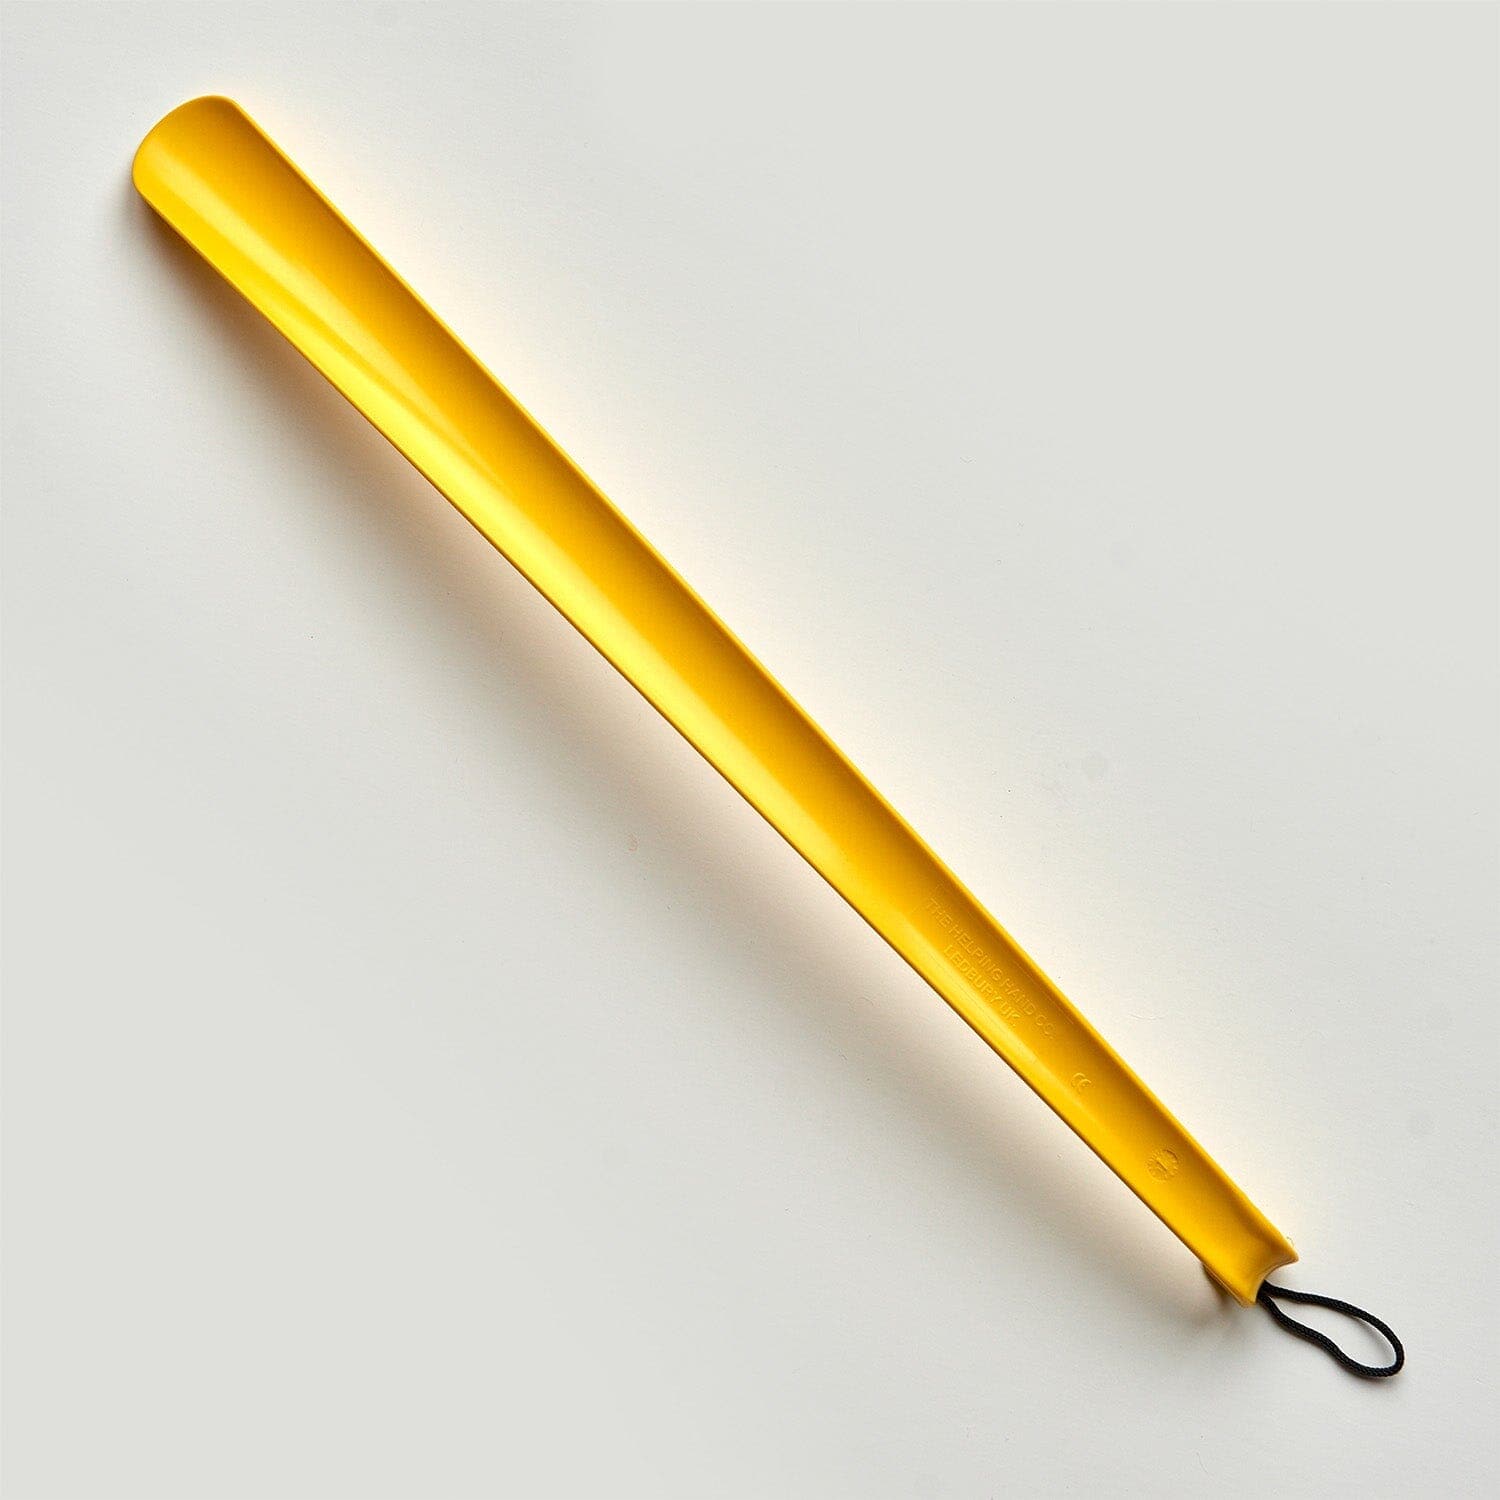 The Helping Hand Company Long Handled Shoe Horn